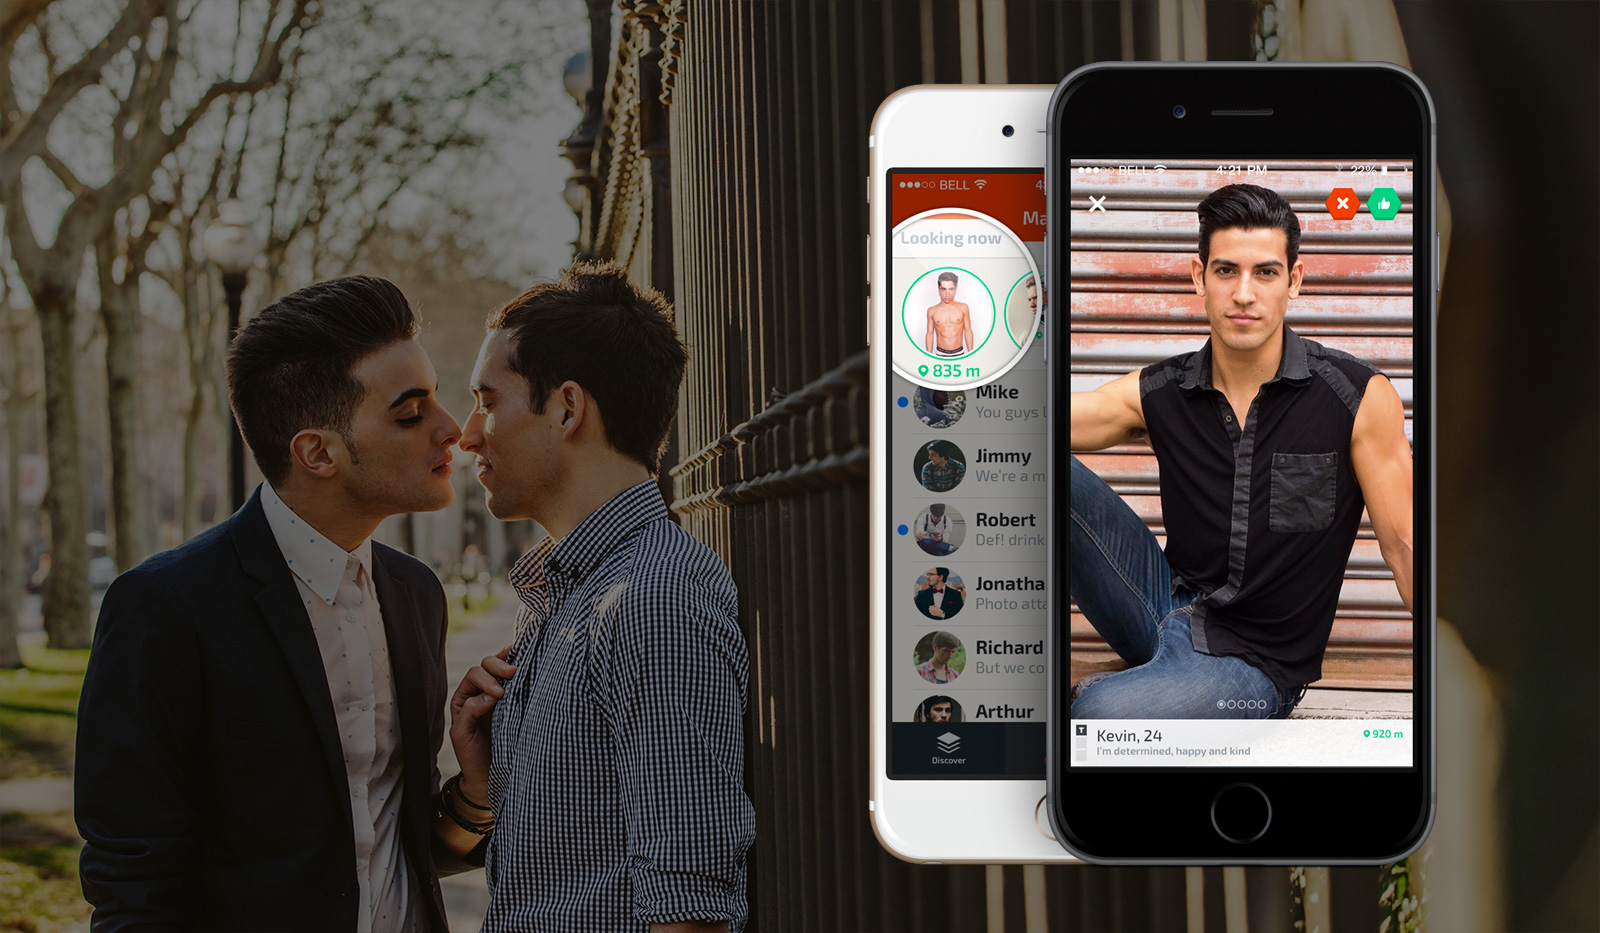 Hanky, a new invite-only dating app that weeds out “creeps and trolls”